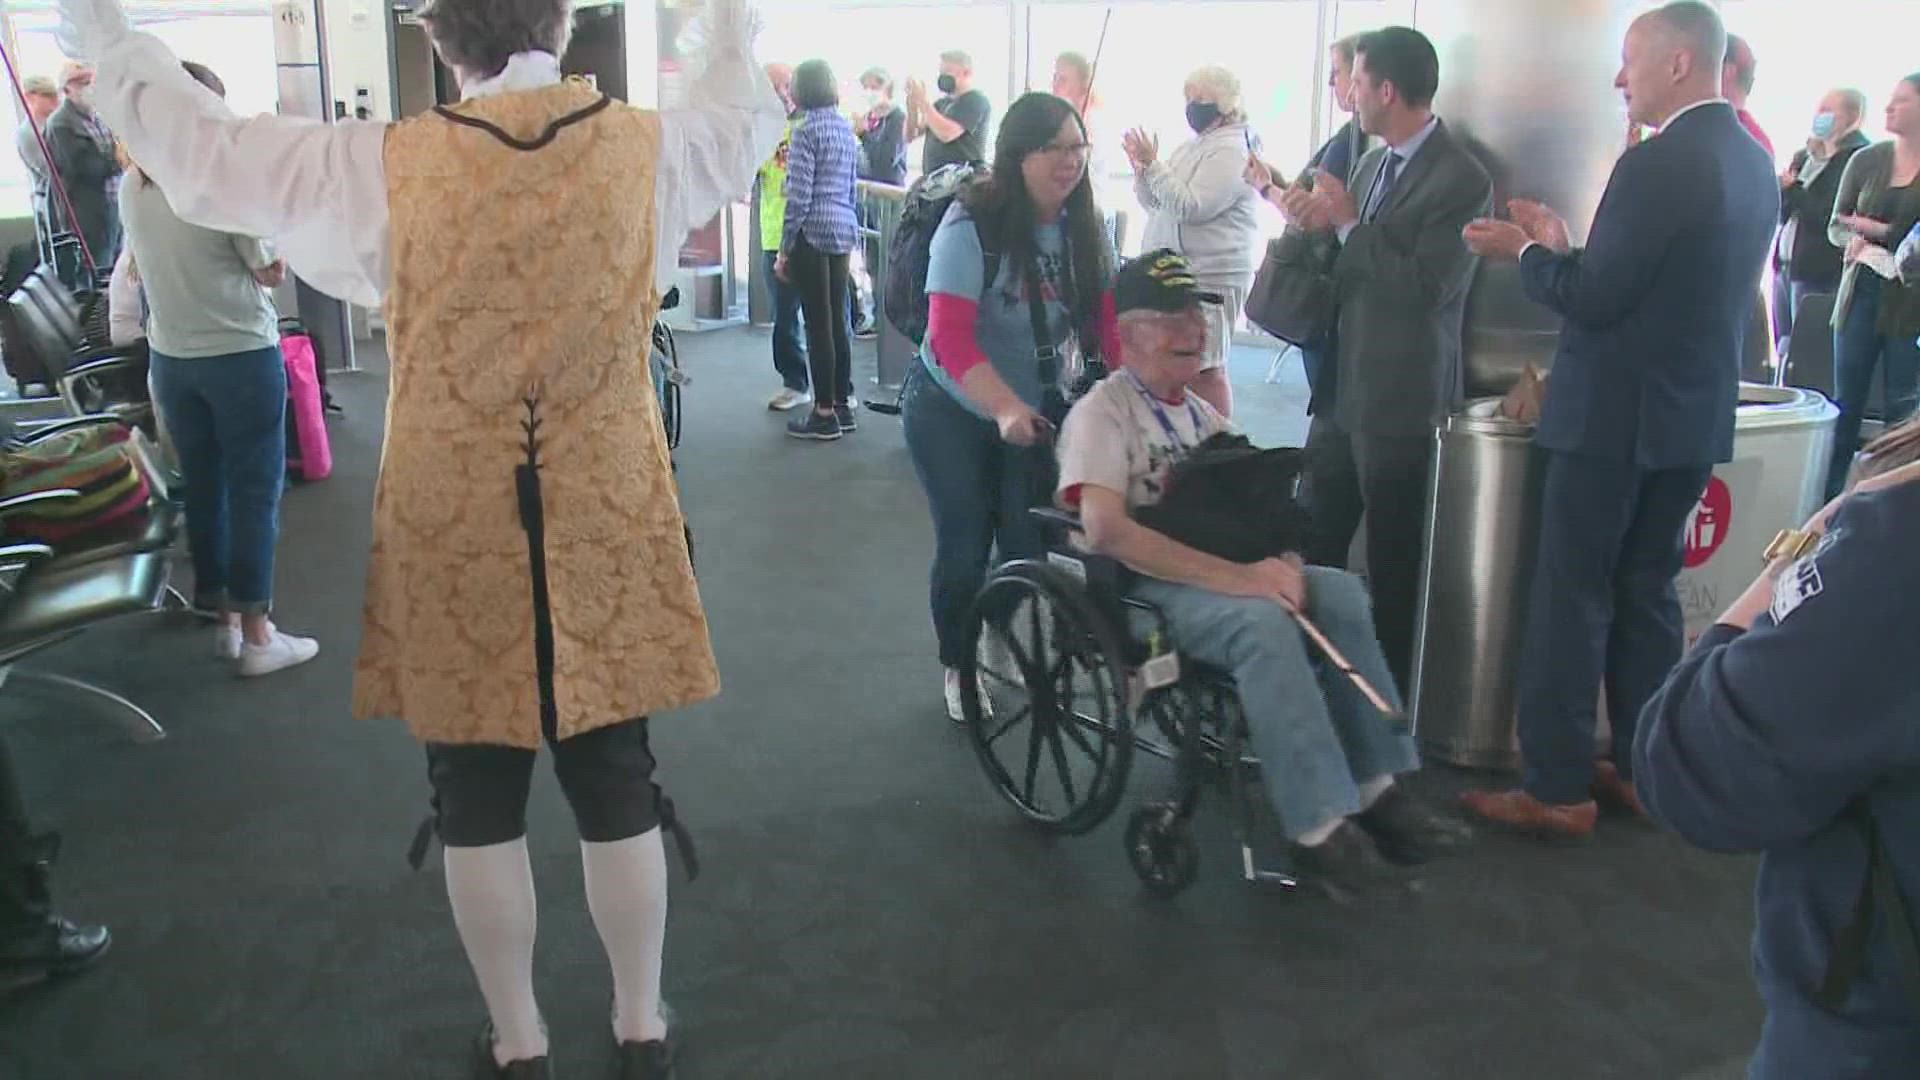 As they entered the Baltimore airport, the welcome for Honor Flight Maine veterans was as warm as ever.